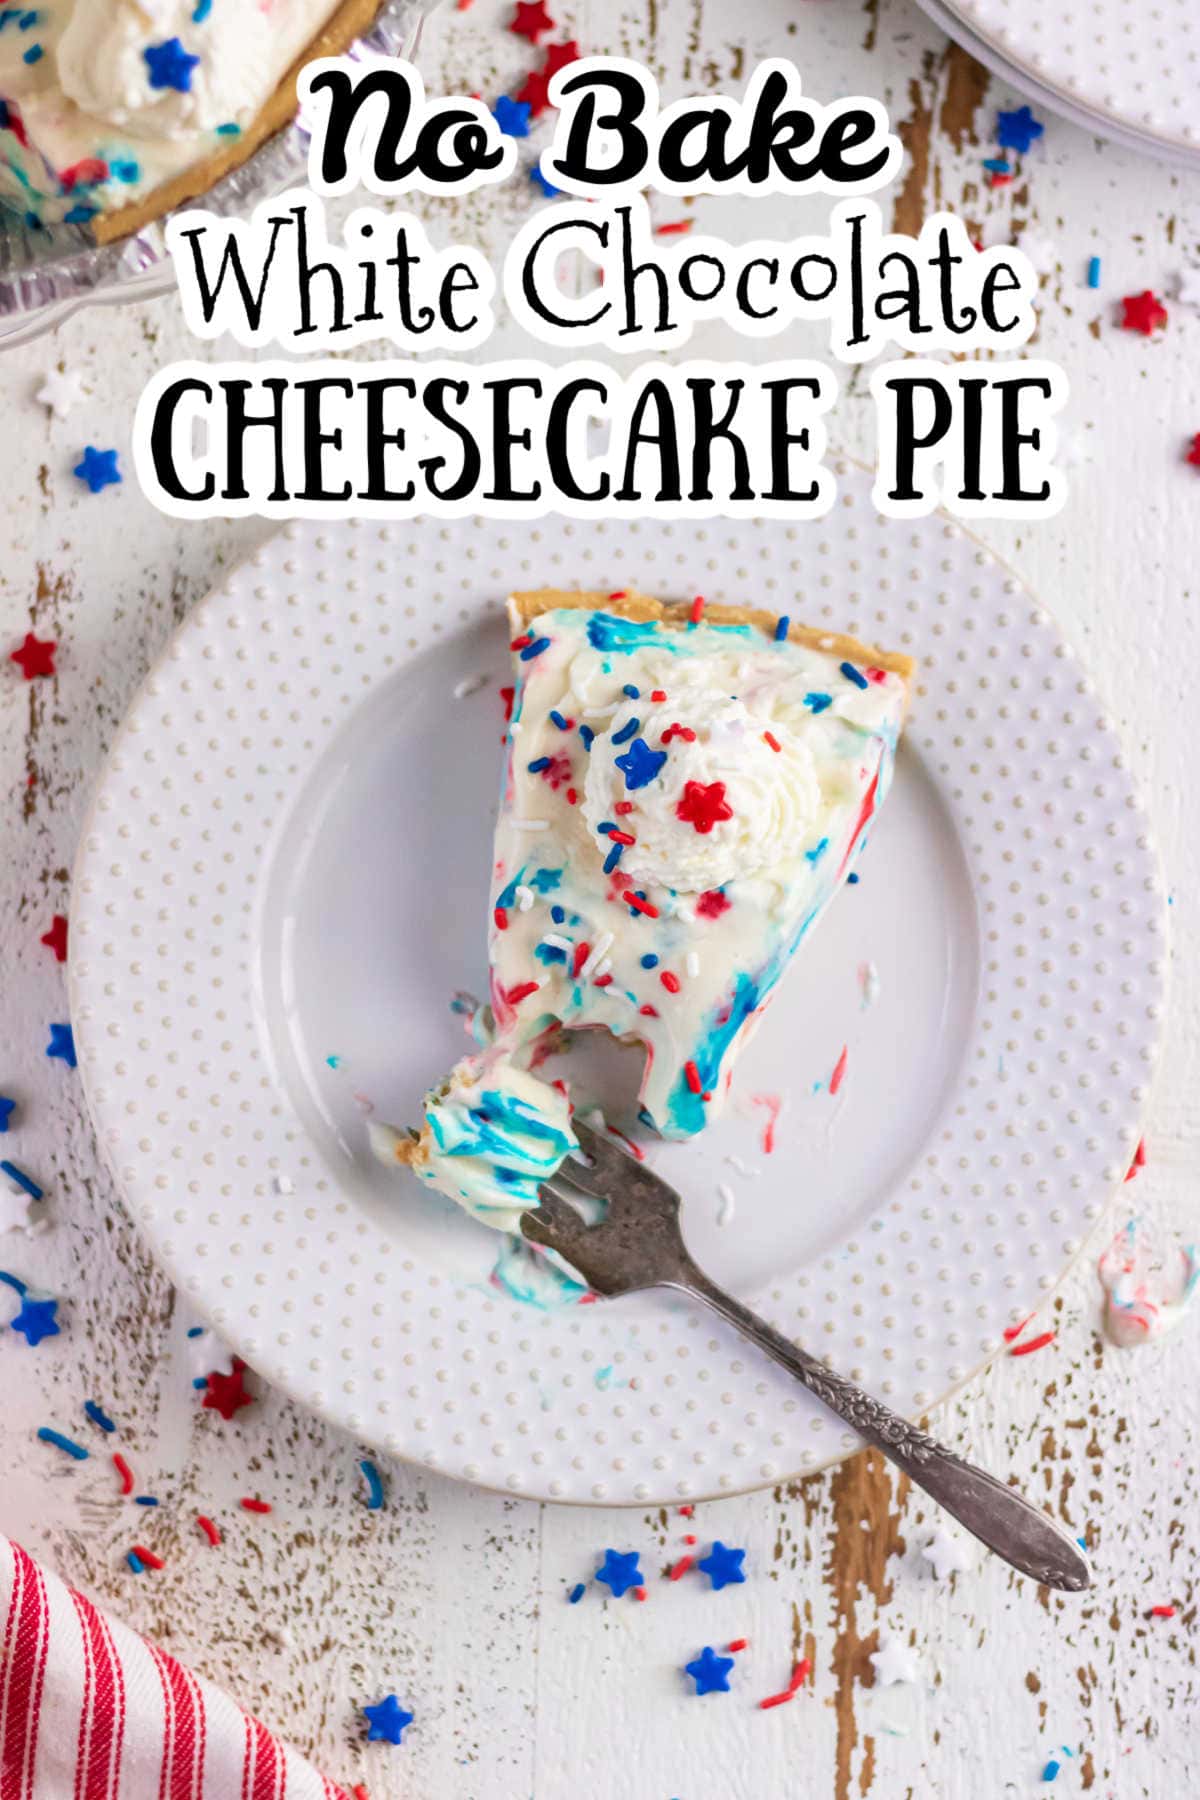 Overhead view of a slice of cheesecake with a title text overlay.